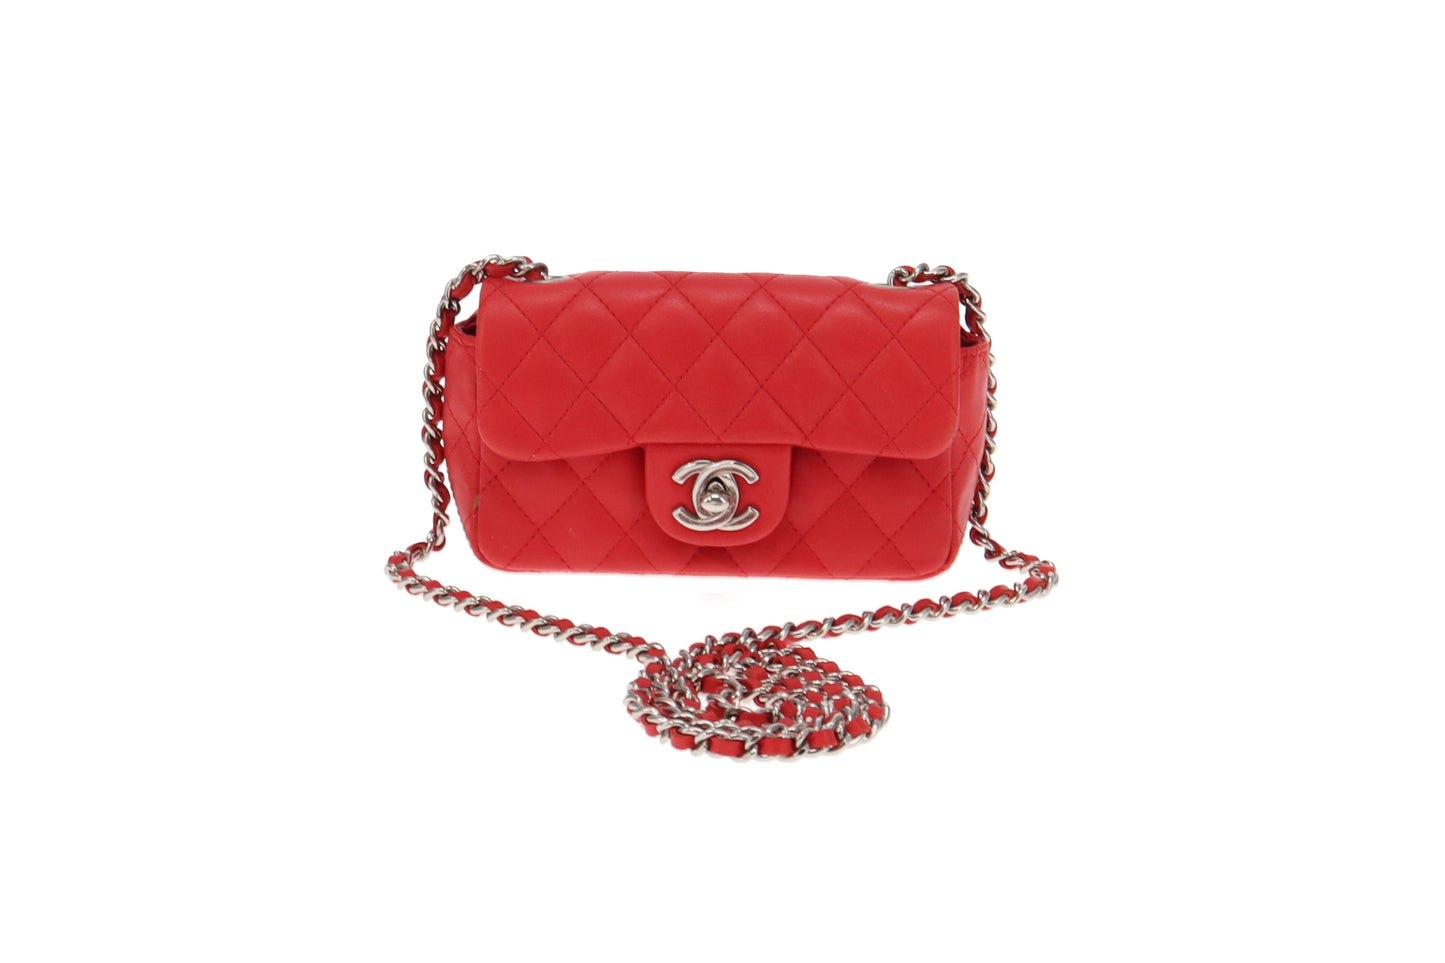 Chanel Coral Red Lambskin SHW Extra Mini Flap Bag 2004/05